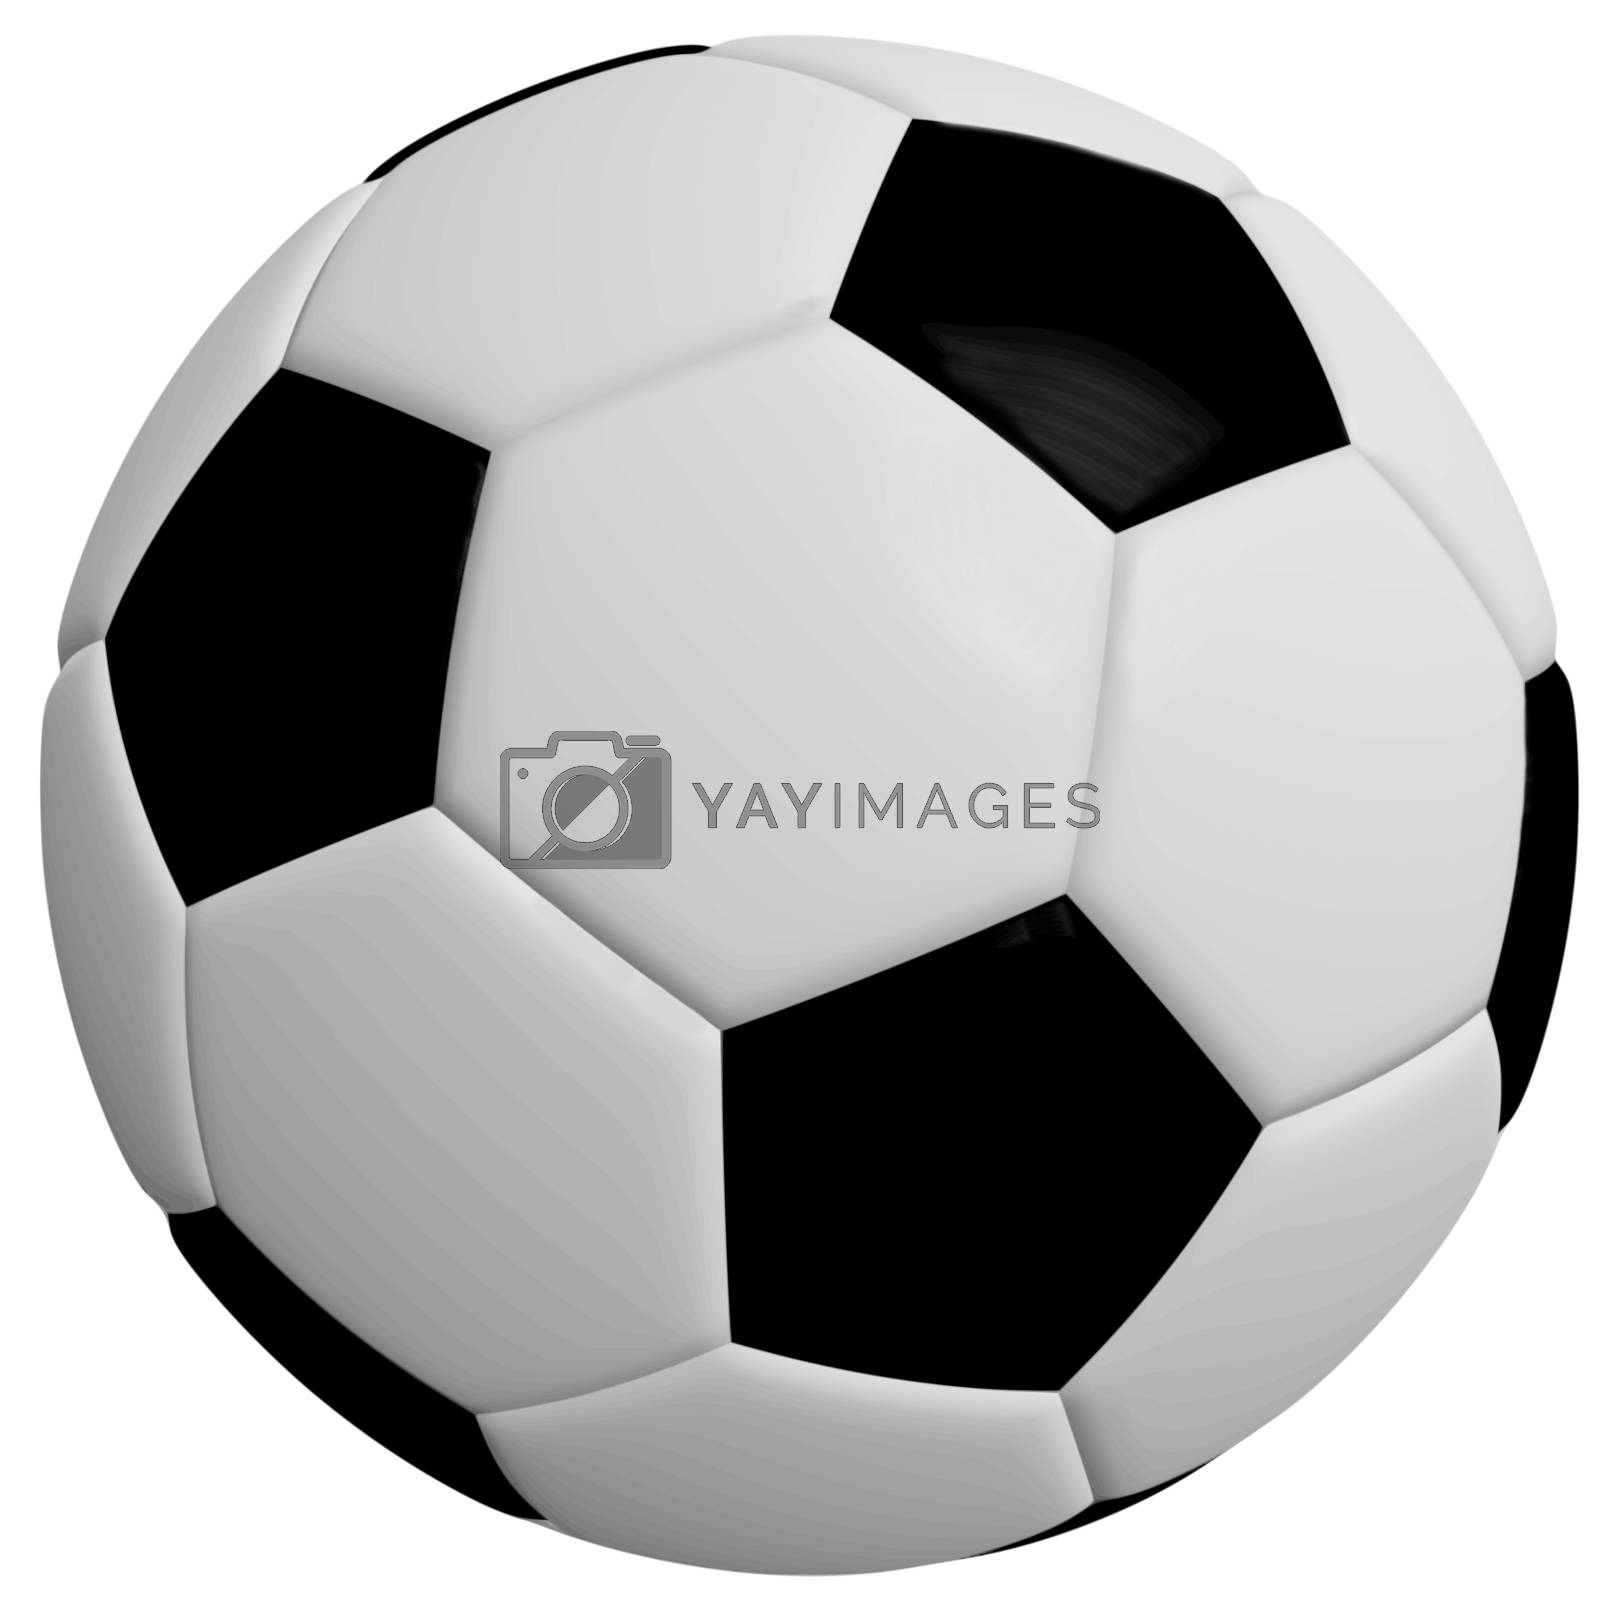 Royalty free image of Black and white soccer ball or football by HdDesign